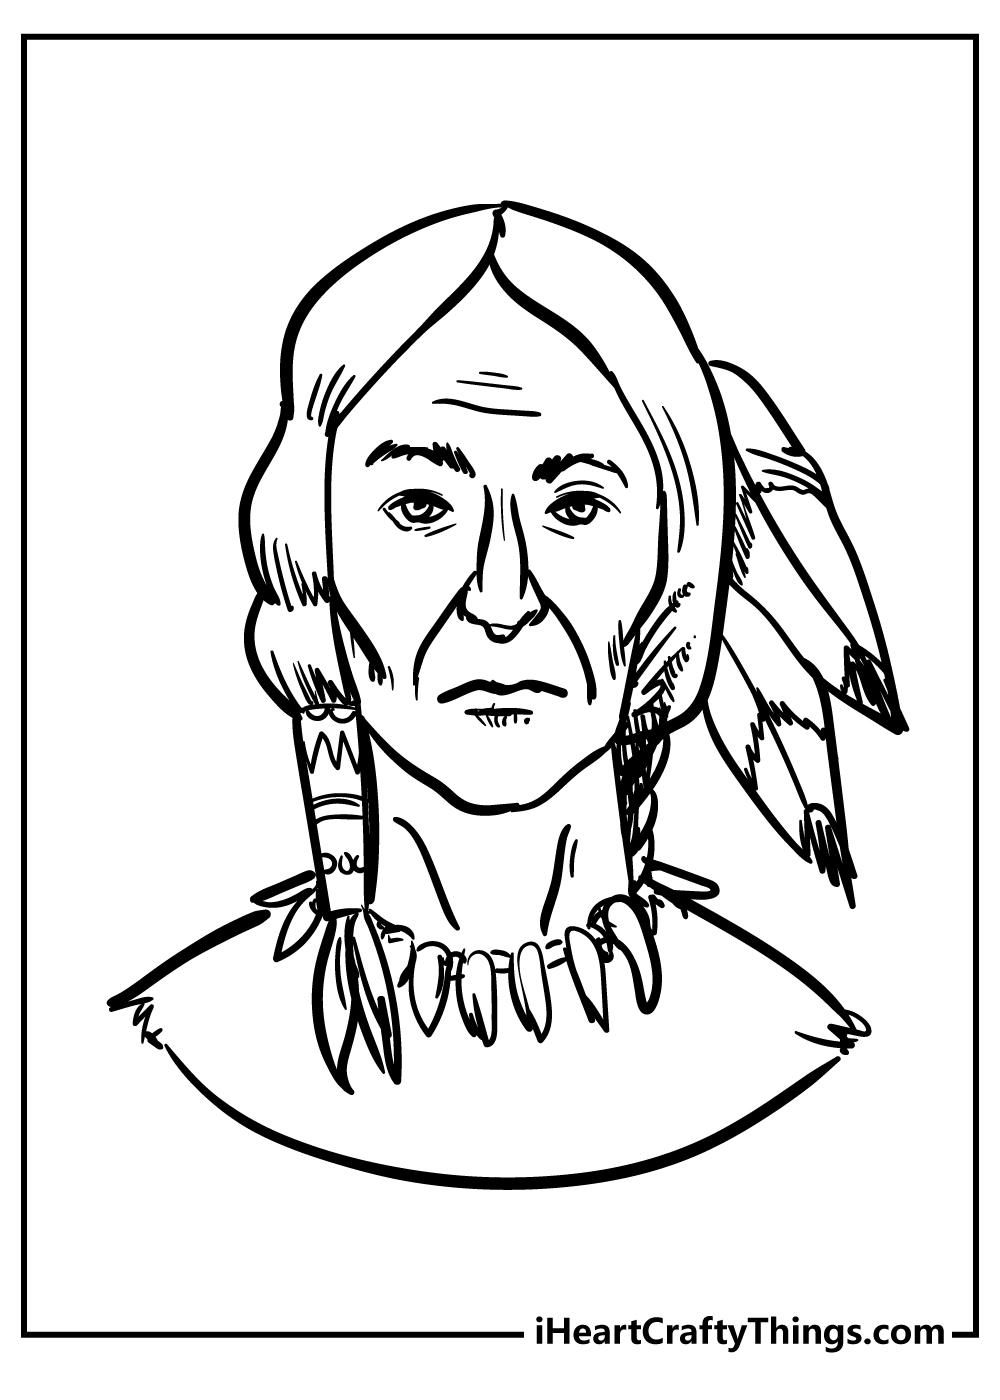 Native American Coloring Pages free pdf download